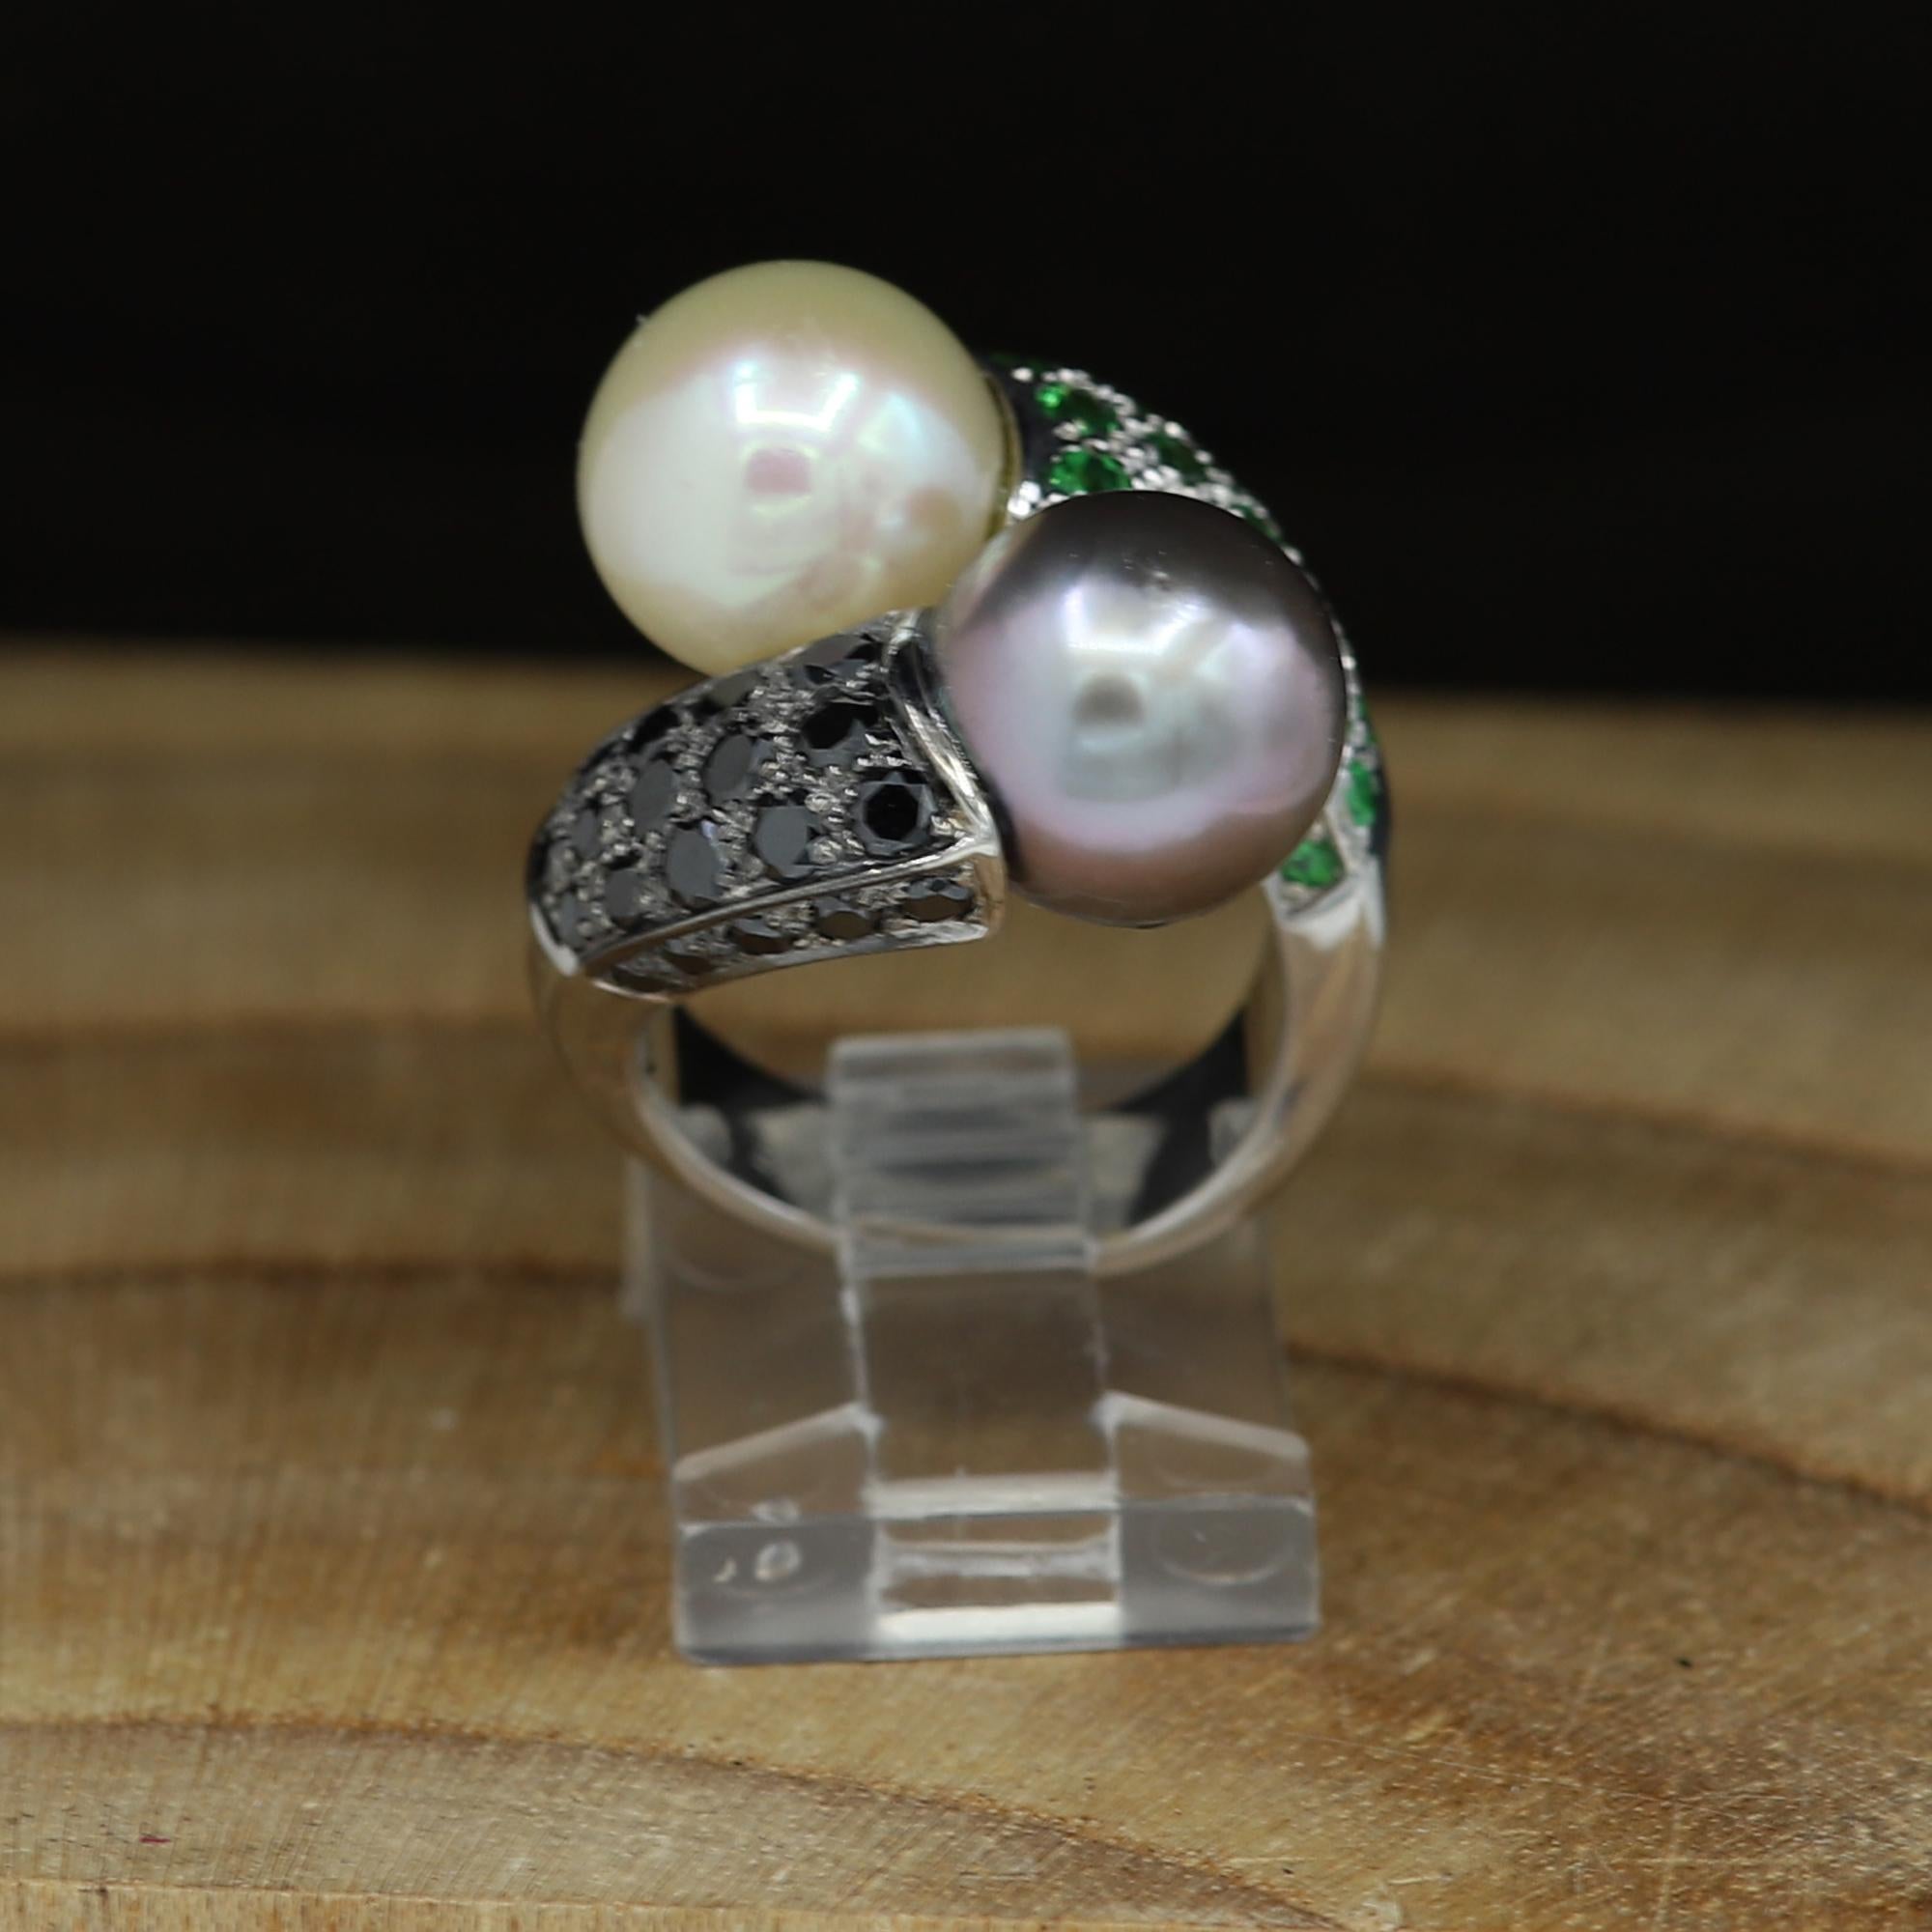 Unique double pearl Ring 18k White Gold, with Tsavorite and Black Diamonds, in the center are two Pearls, one is a Tahitian Grey Pearl, and the other is South Sea light yellowish - beige tone - both are approx 11mm in size.
Finger size  5.5 - cannot